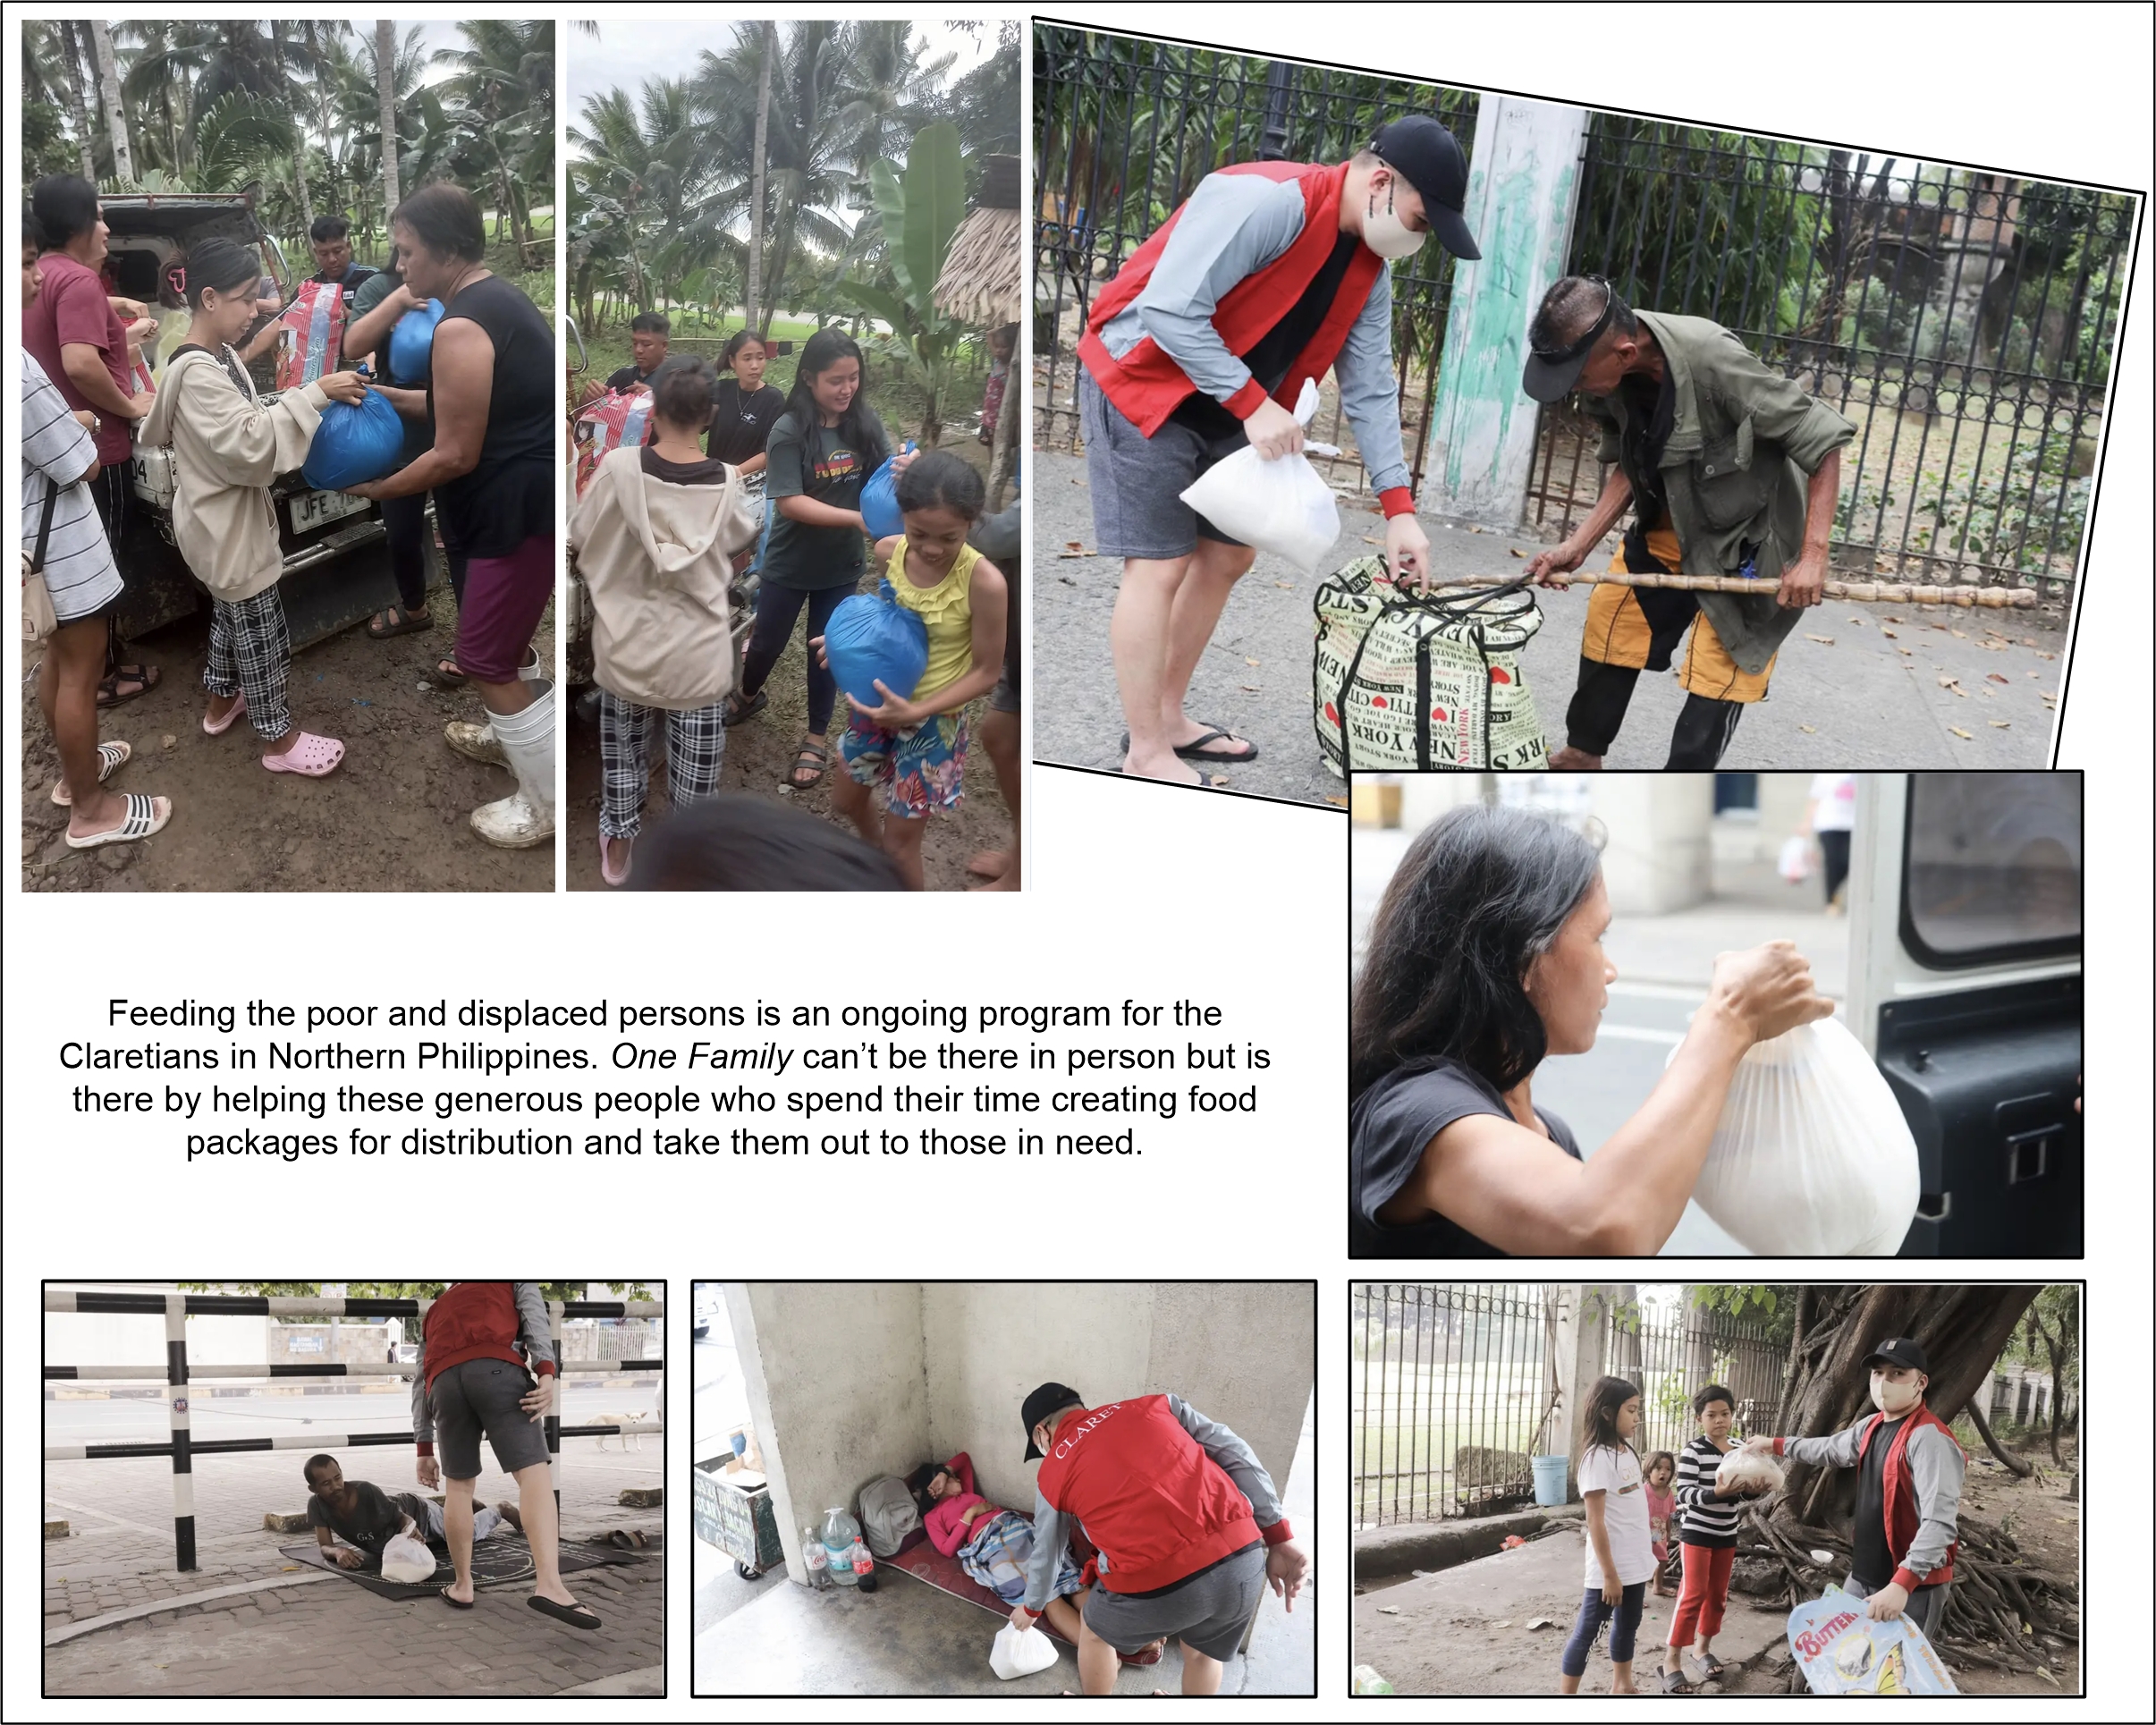 Feeding the displaced people in Quezon Philippines